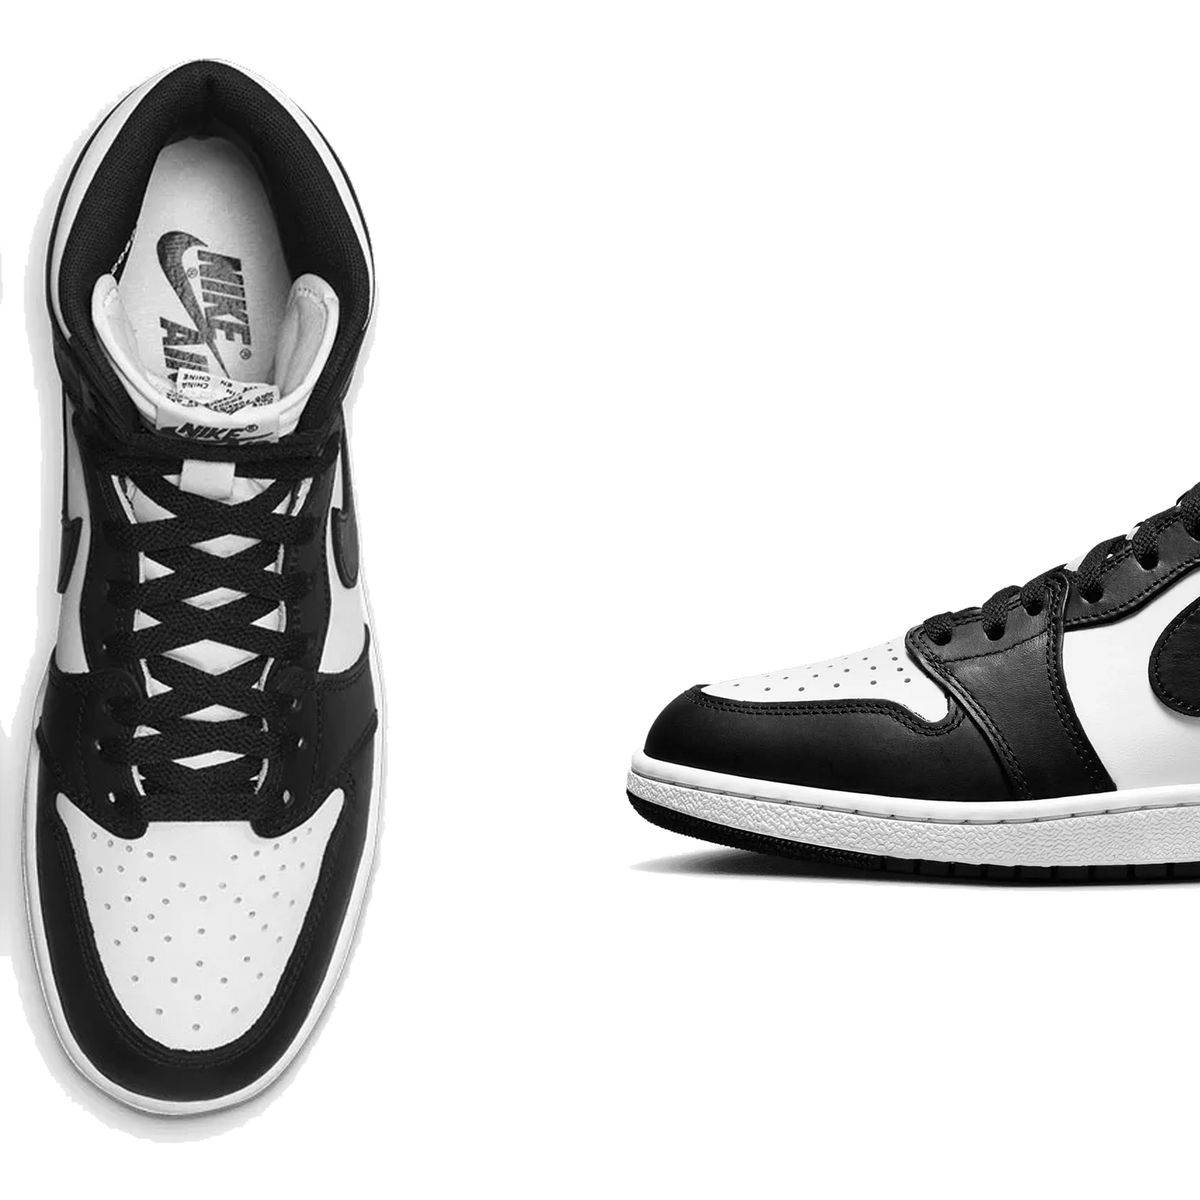 The Air Jordan 1 High '85 'Black/White' Is About to Drop. Here's